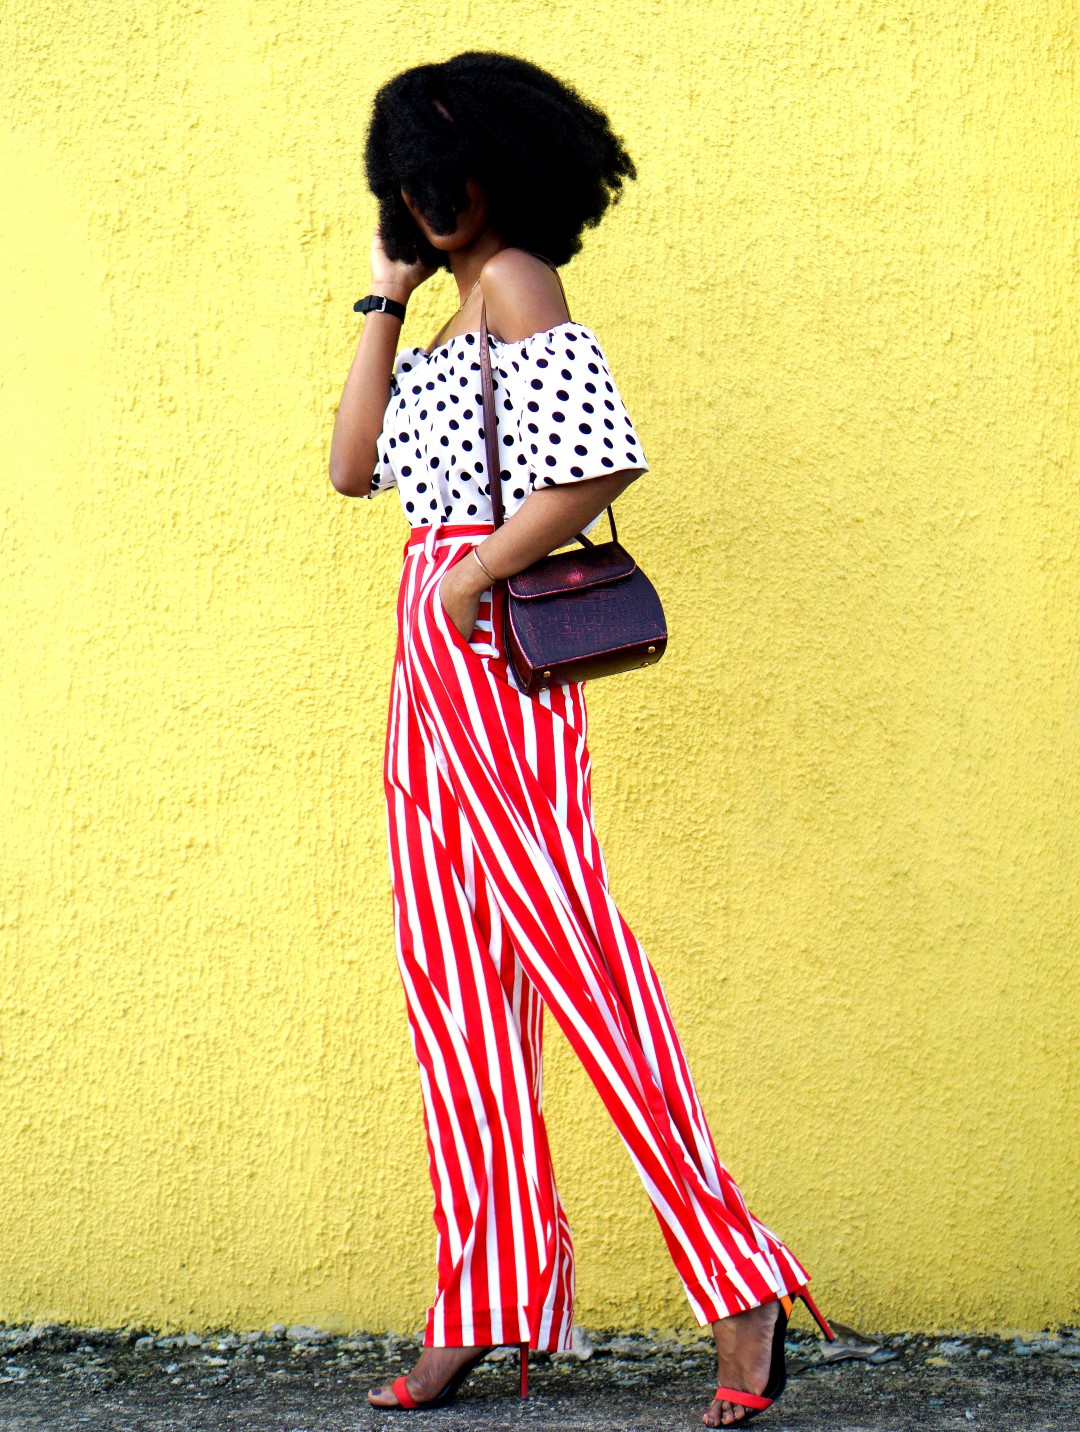 Mixed prints fashion trend : Nigerian fashion and lifestyle blogger Cassie Daves In a polka dot off shoulder top and striped pants